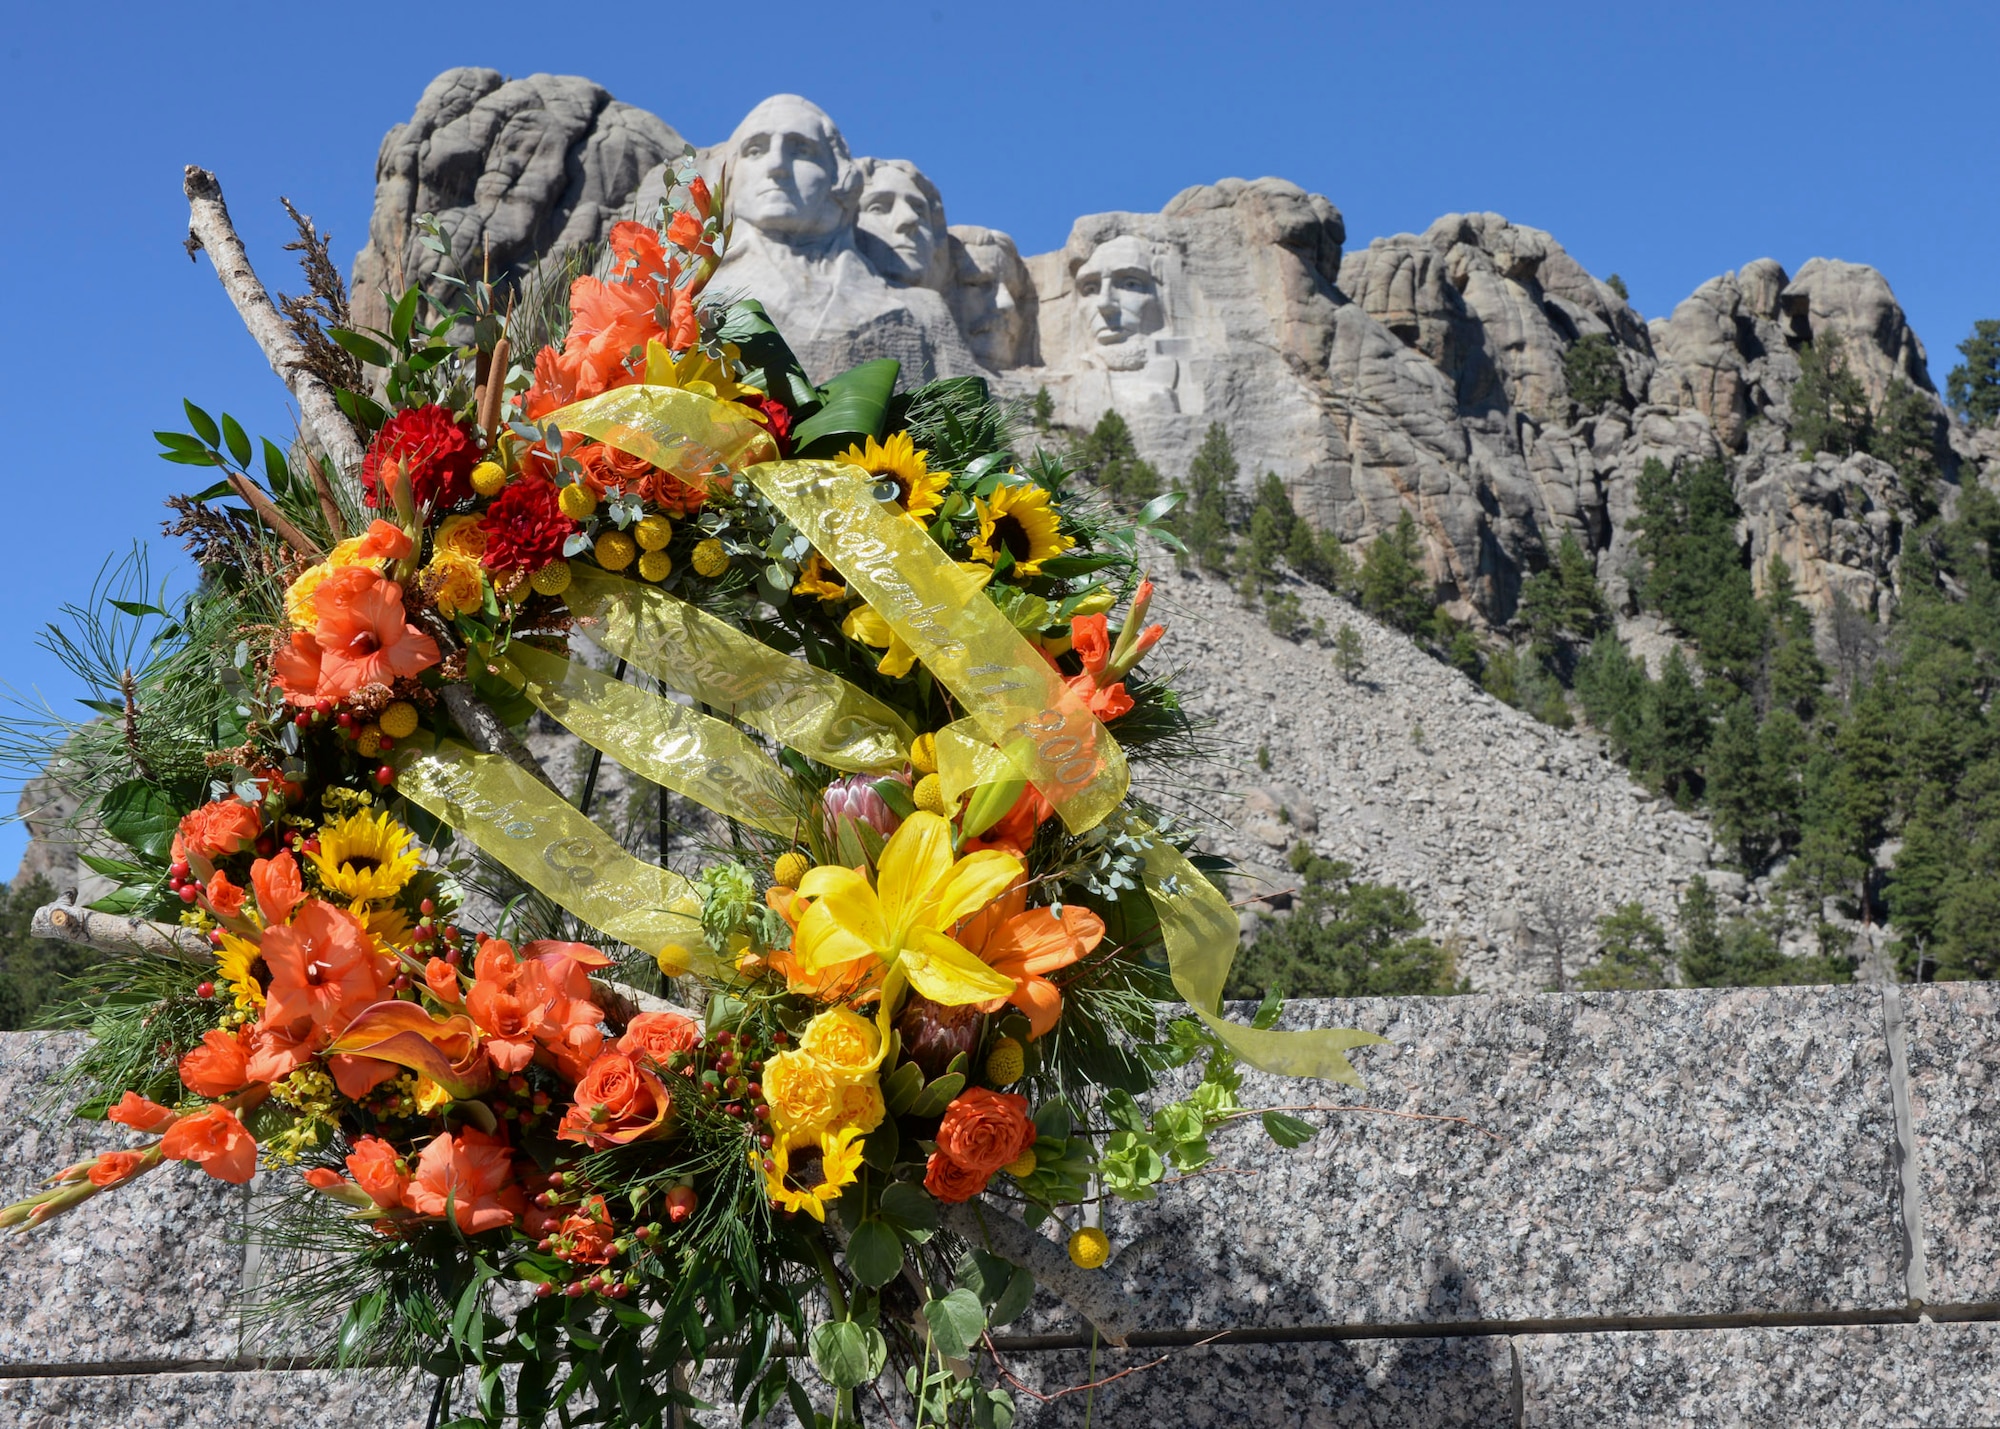 A wreath stands in honor of the 15th anniversary of the attacks on Sept. 11, 2001, at the Mount Rushmore National Memorial, S.D., Sept. 11, 2016. Defense officials from more than 30 countries conducted a wreath laying ceremony in remembrance of the attacks that occurred in New York, Virginia and Pennsylvania. (U.S. Air Force photo by Senior Airman Anania Tekurio)  